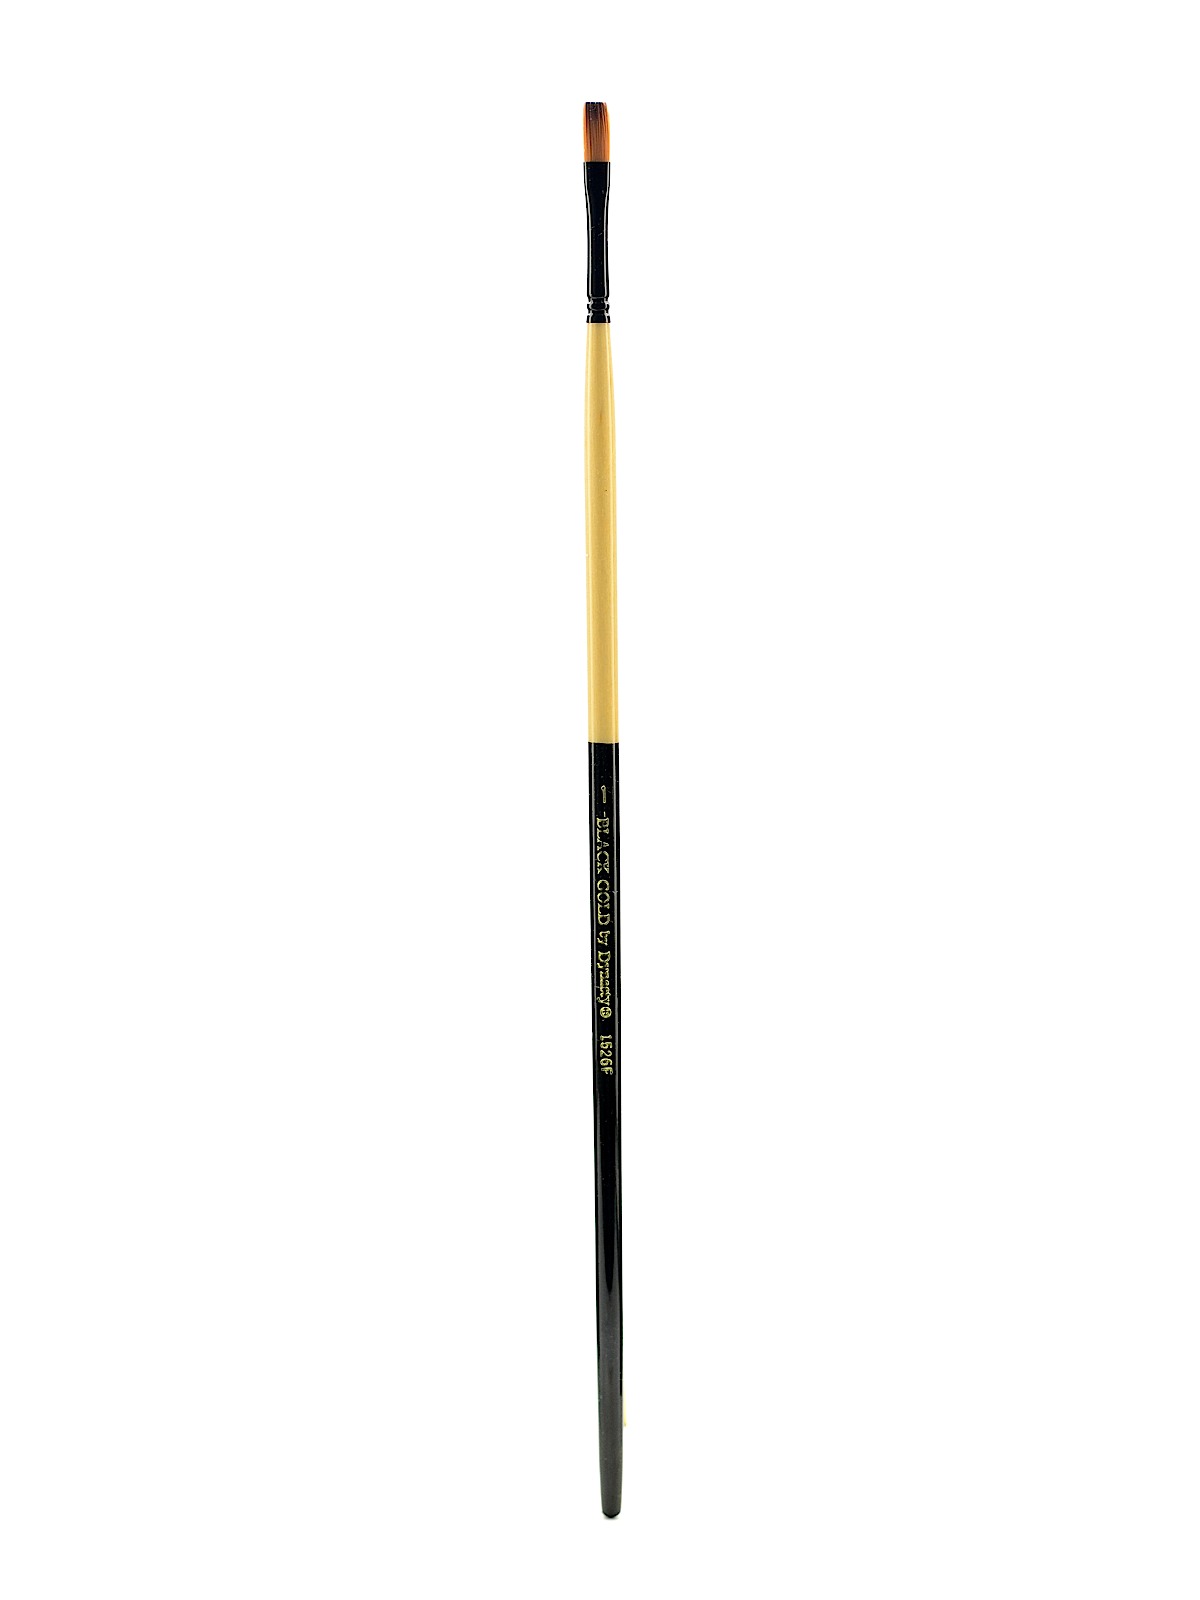 Black Gold Series Long Handled Synthetic Brushes 1 Flat 1526F